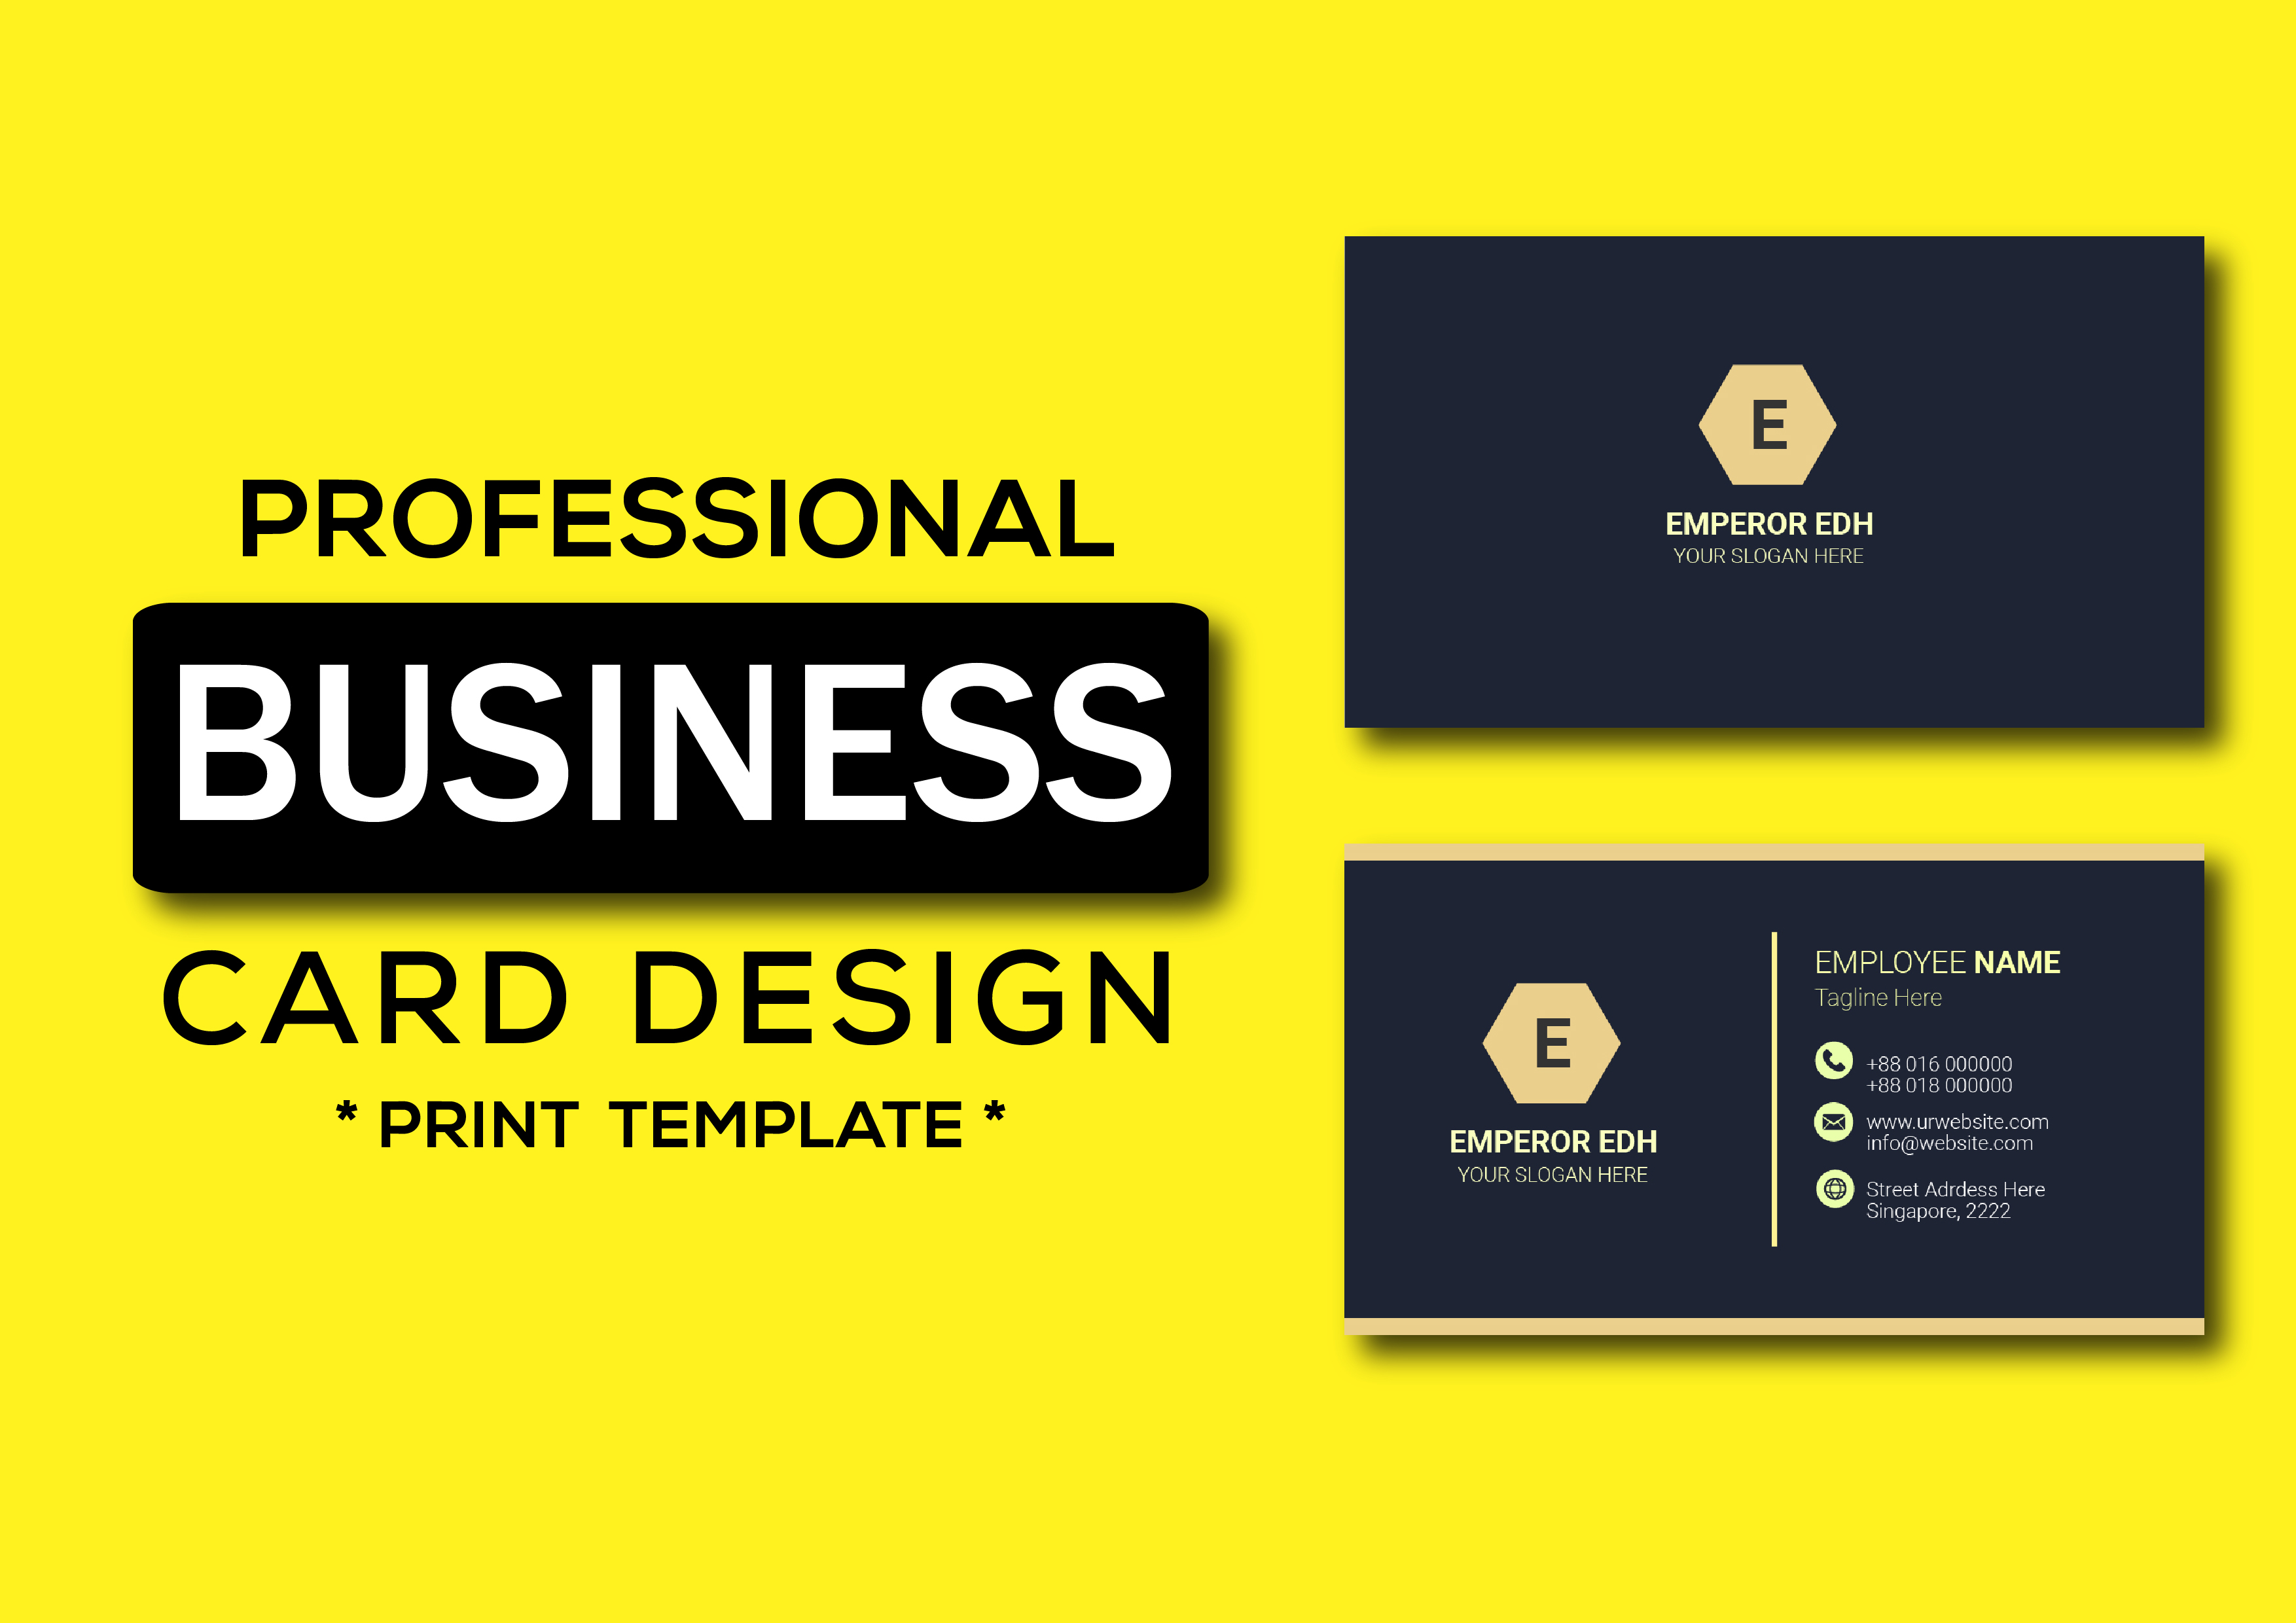 I will design professional business card print template